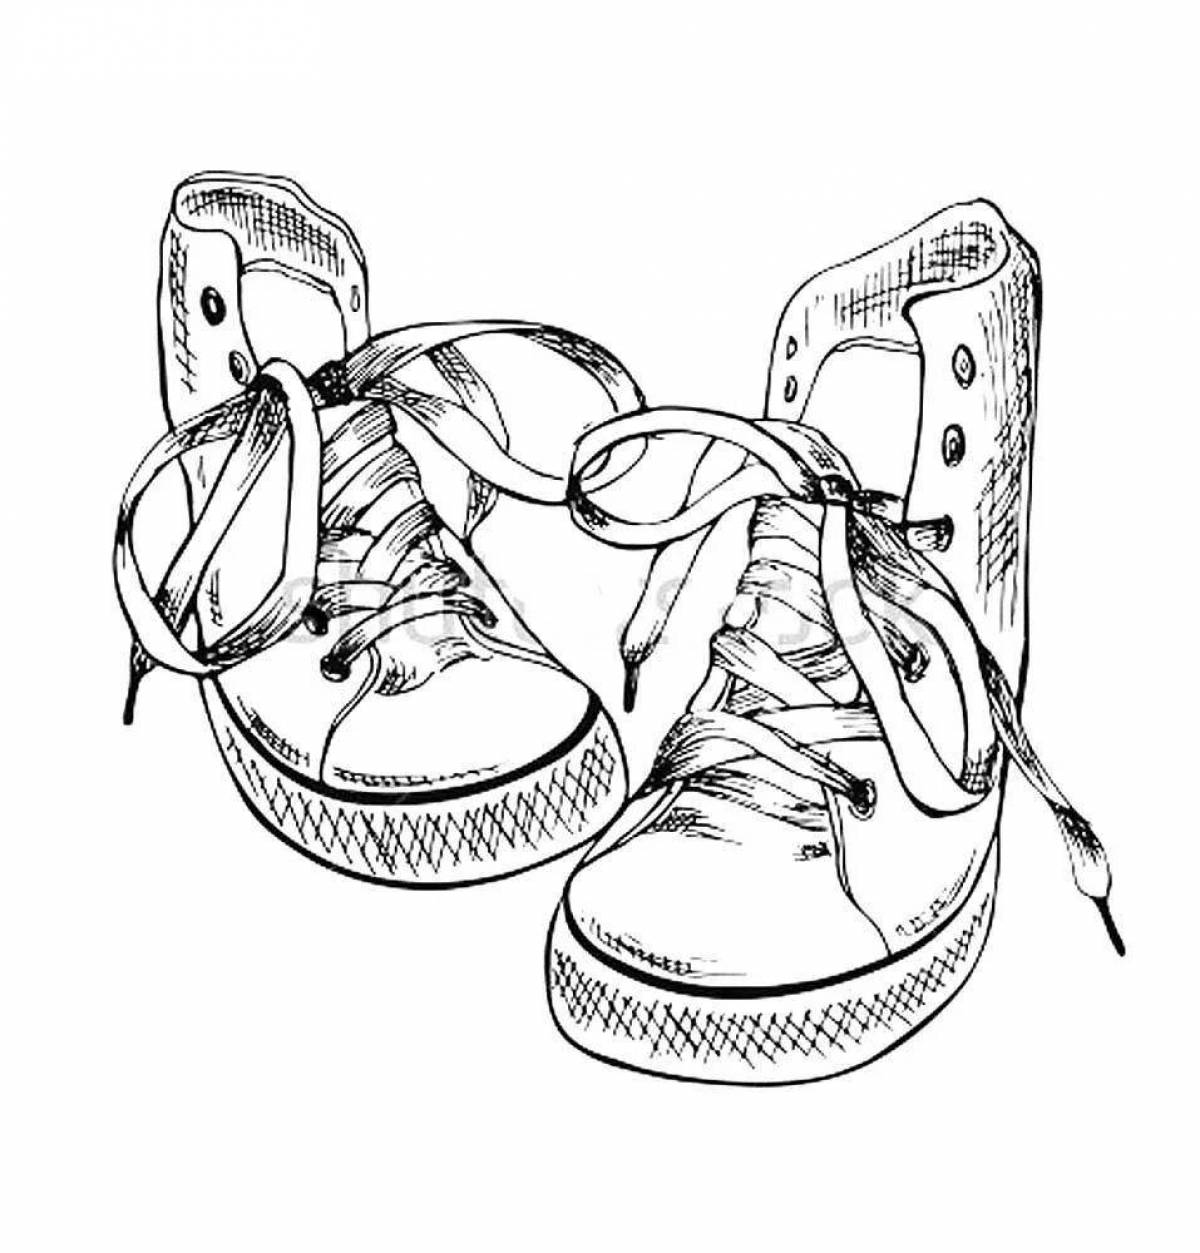 Coloring book exquisite sneakers for children